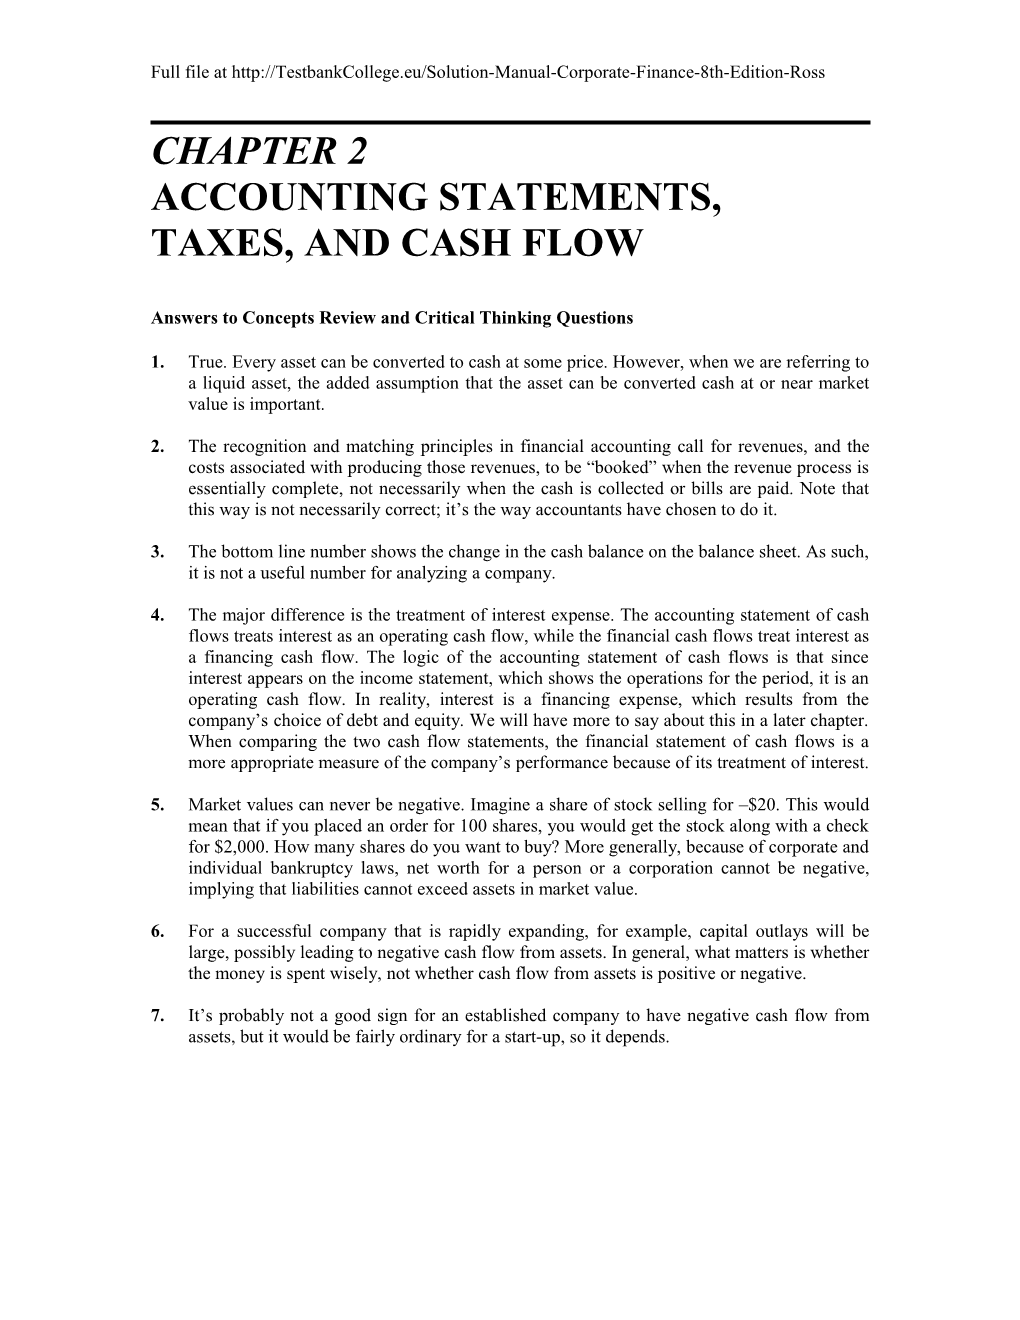 Accounting Statements, Taxes, and Cash Flow